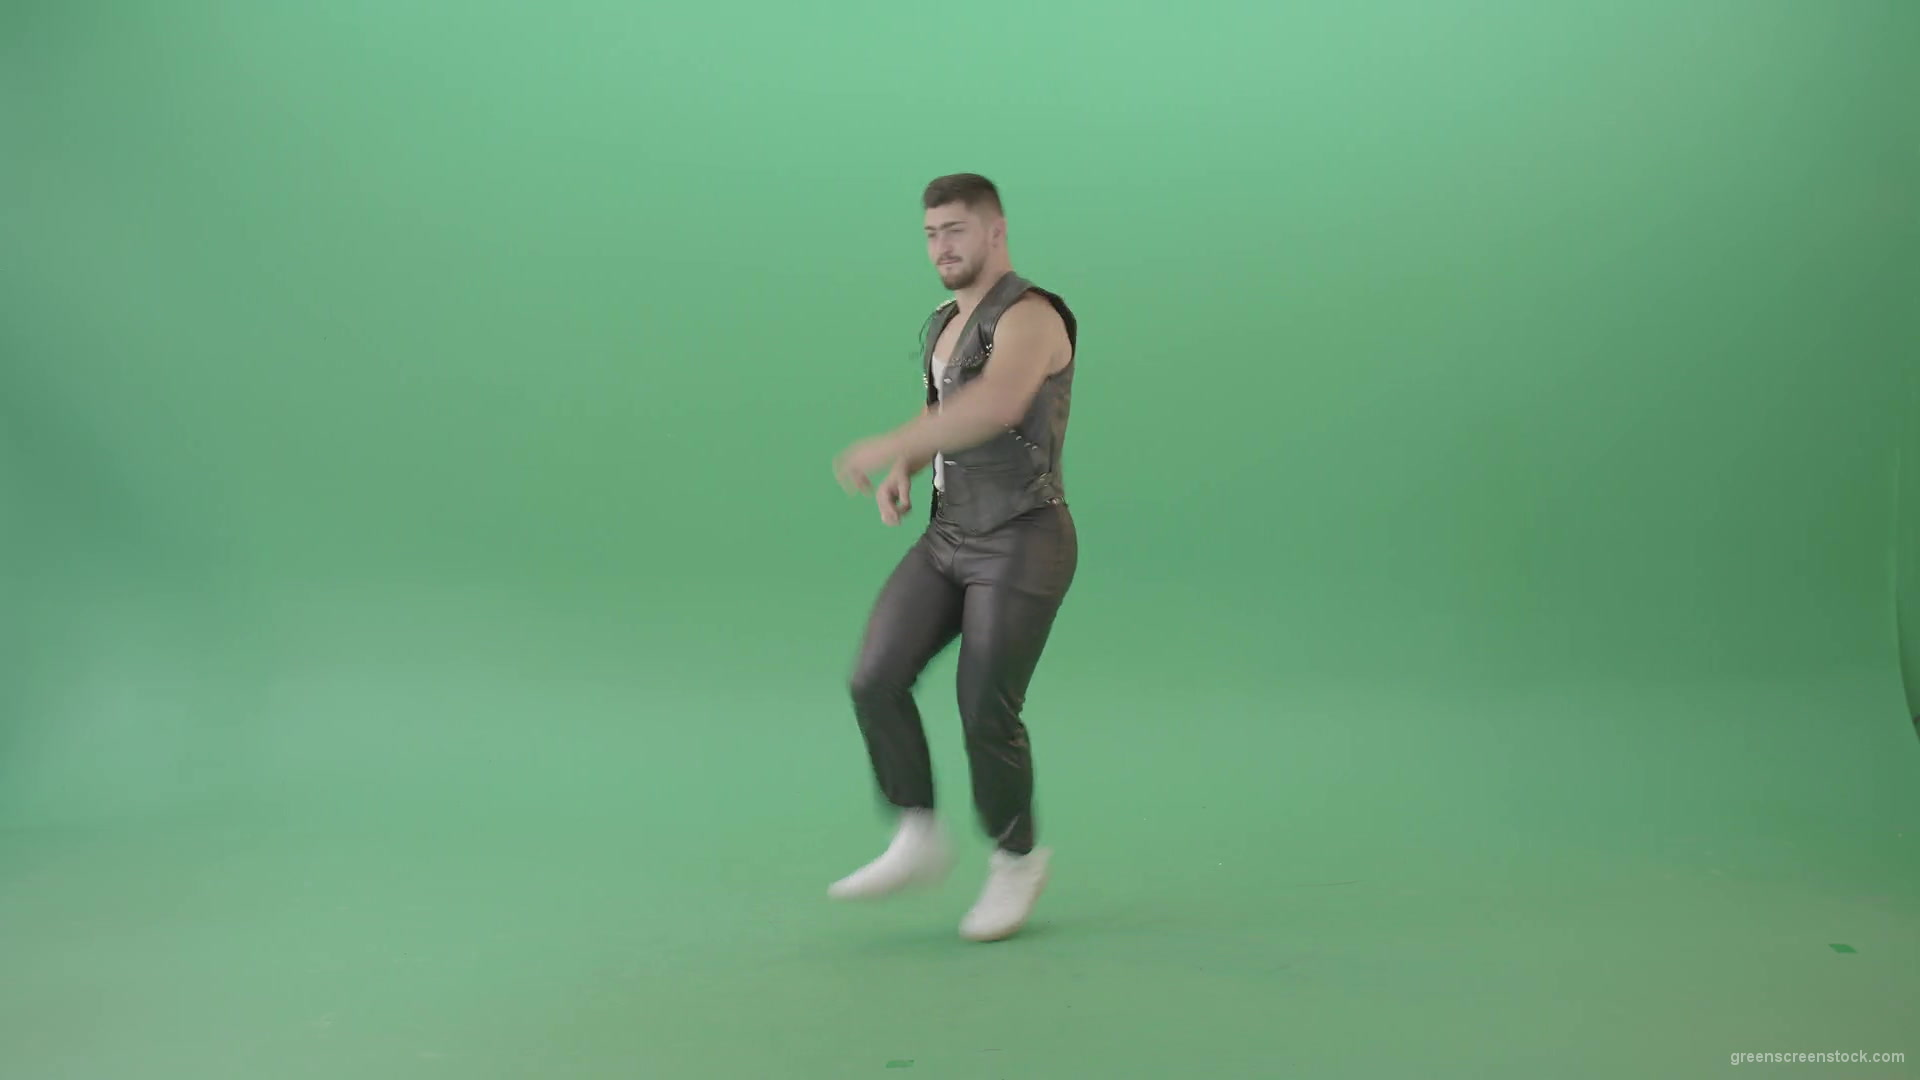 Angry-caucasian-Man-in-Black-leather-costume-dancing-Pop-Moves-on-Green-Screen-4K-Video-Footage-1920_002 Green Screen Stock